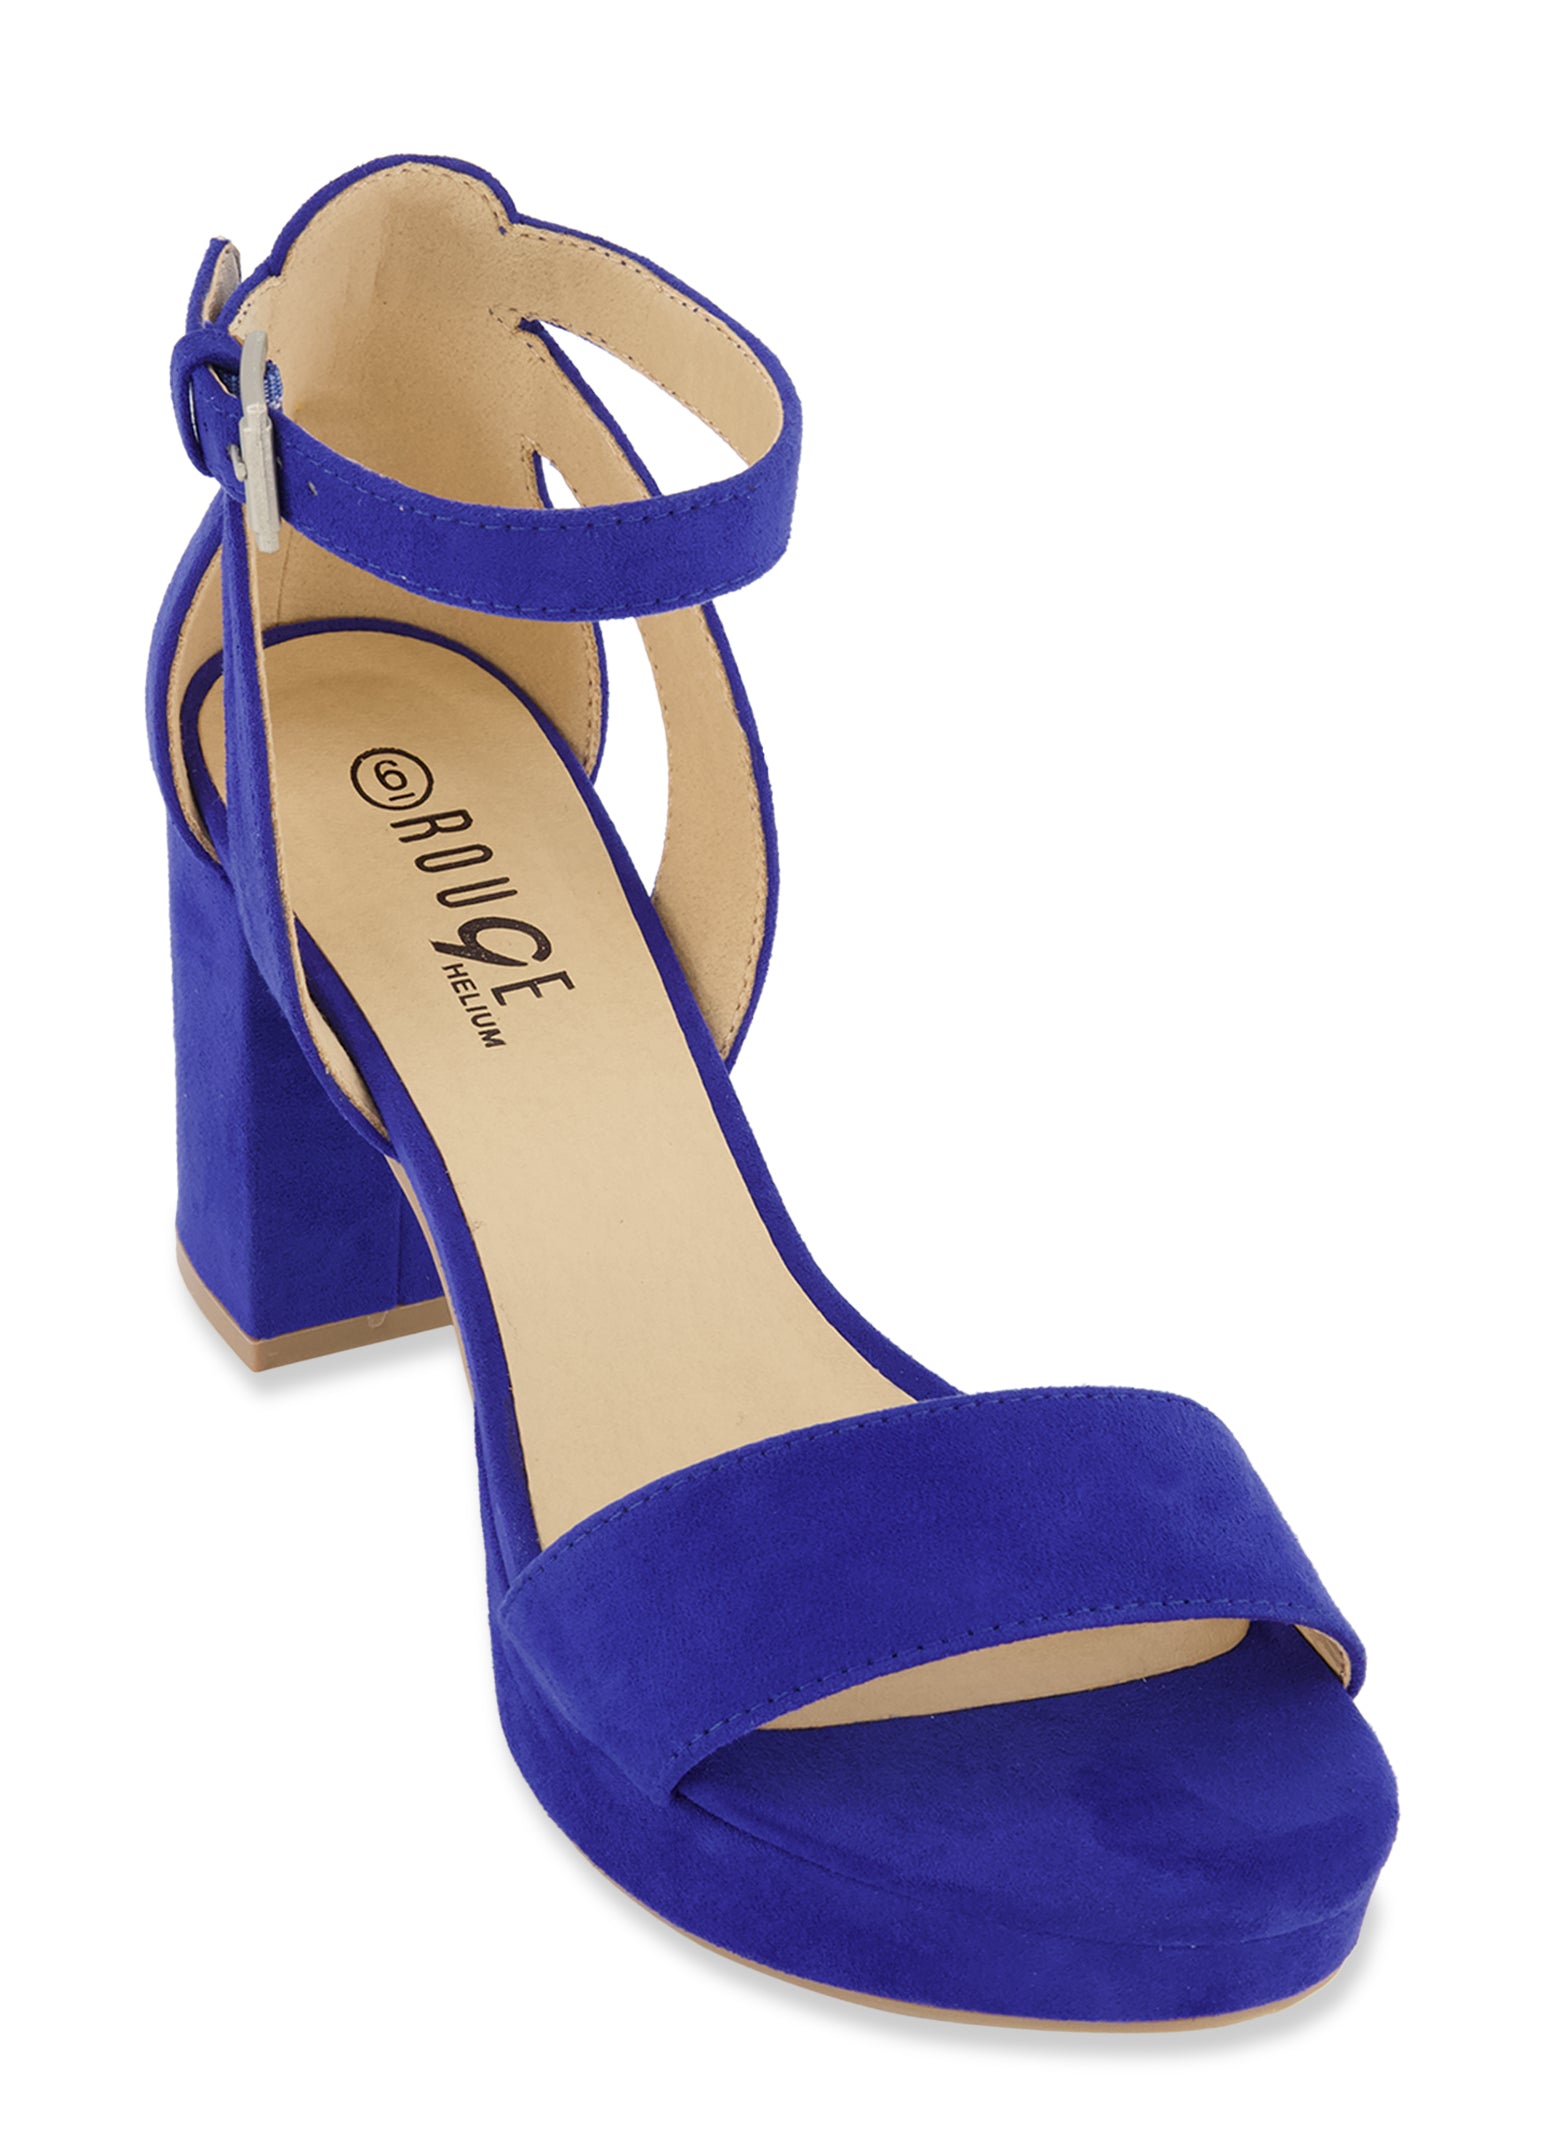 1950s Royal Blue Kitten Heel Pumps Shoes UK 4.5 – Fashion At Your Feet